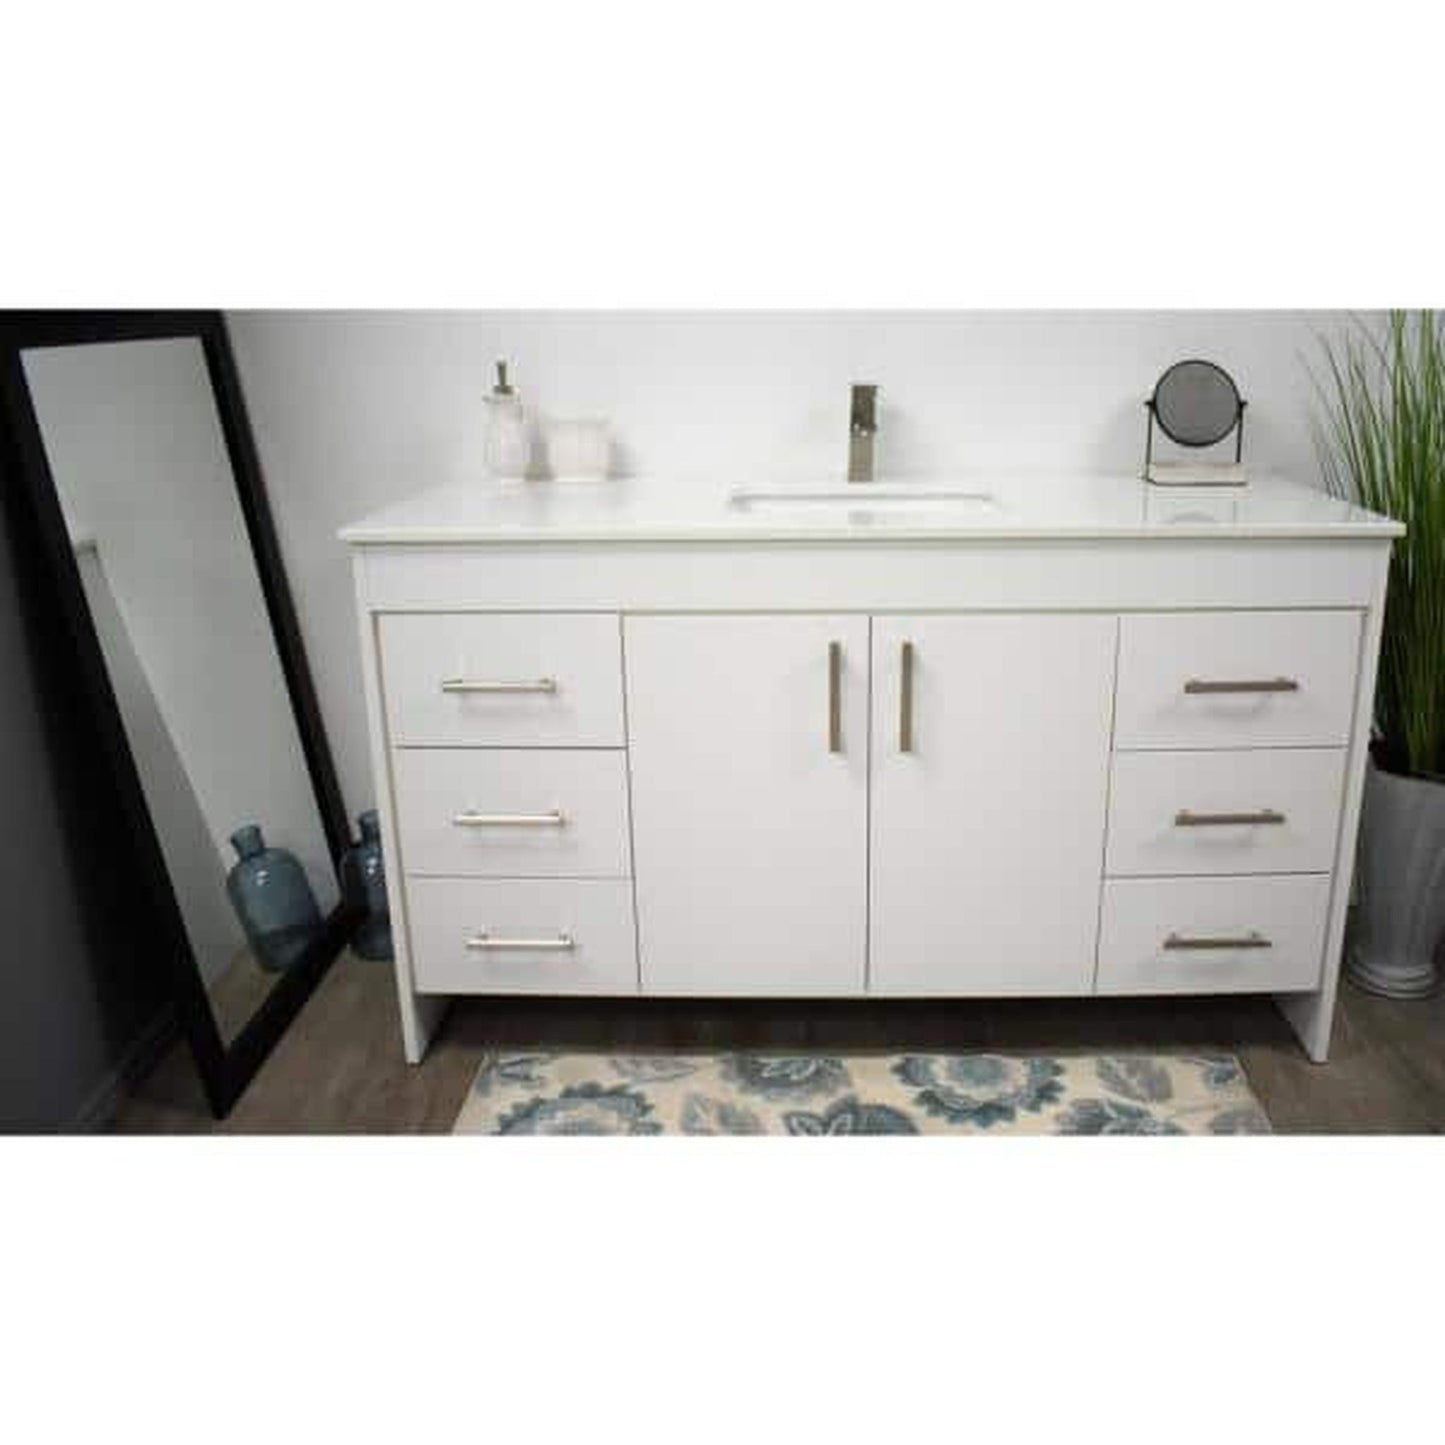 Volpa USA Capri 48" x 22" White Freestanding Modern Bathroom Vanity With Preinstalled Undermount Sink And White Microstone Top With Brushed Nickel Edge Handles